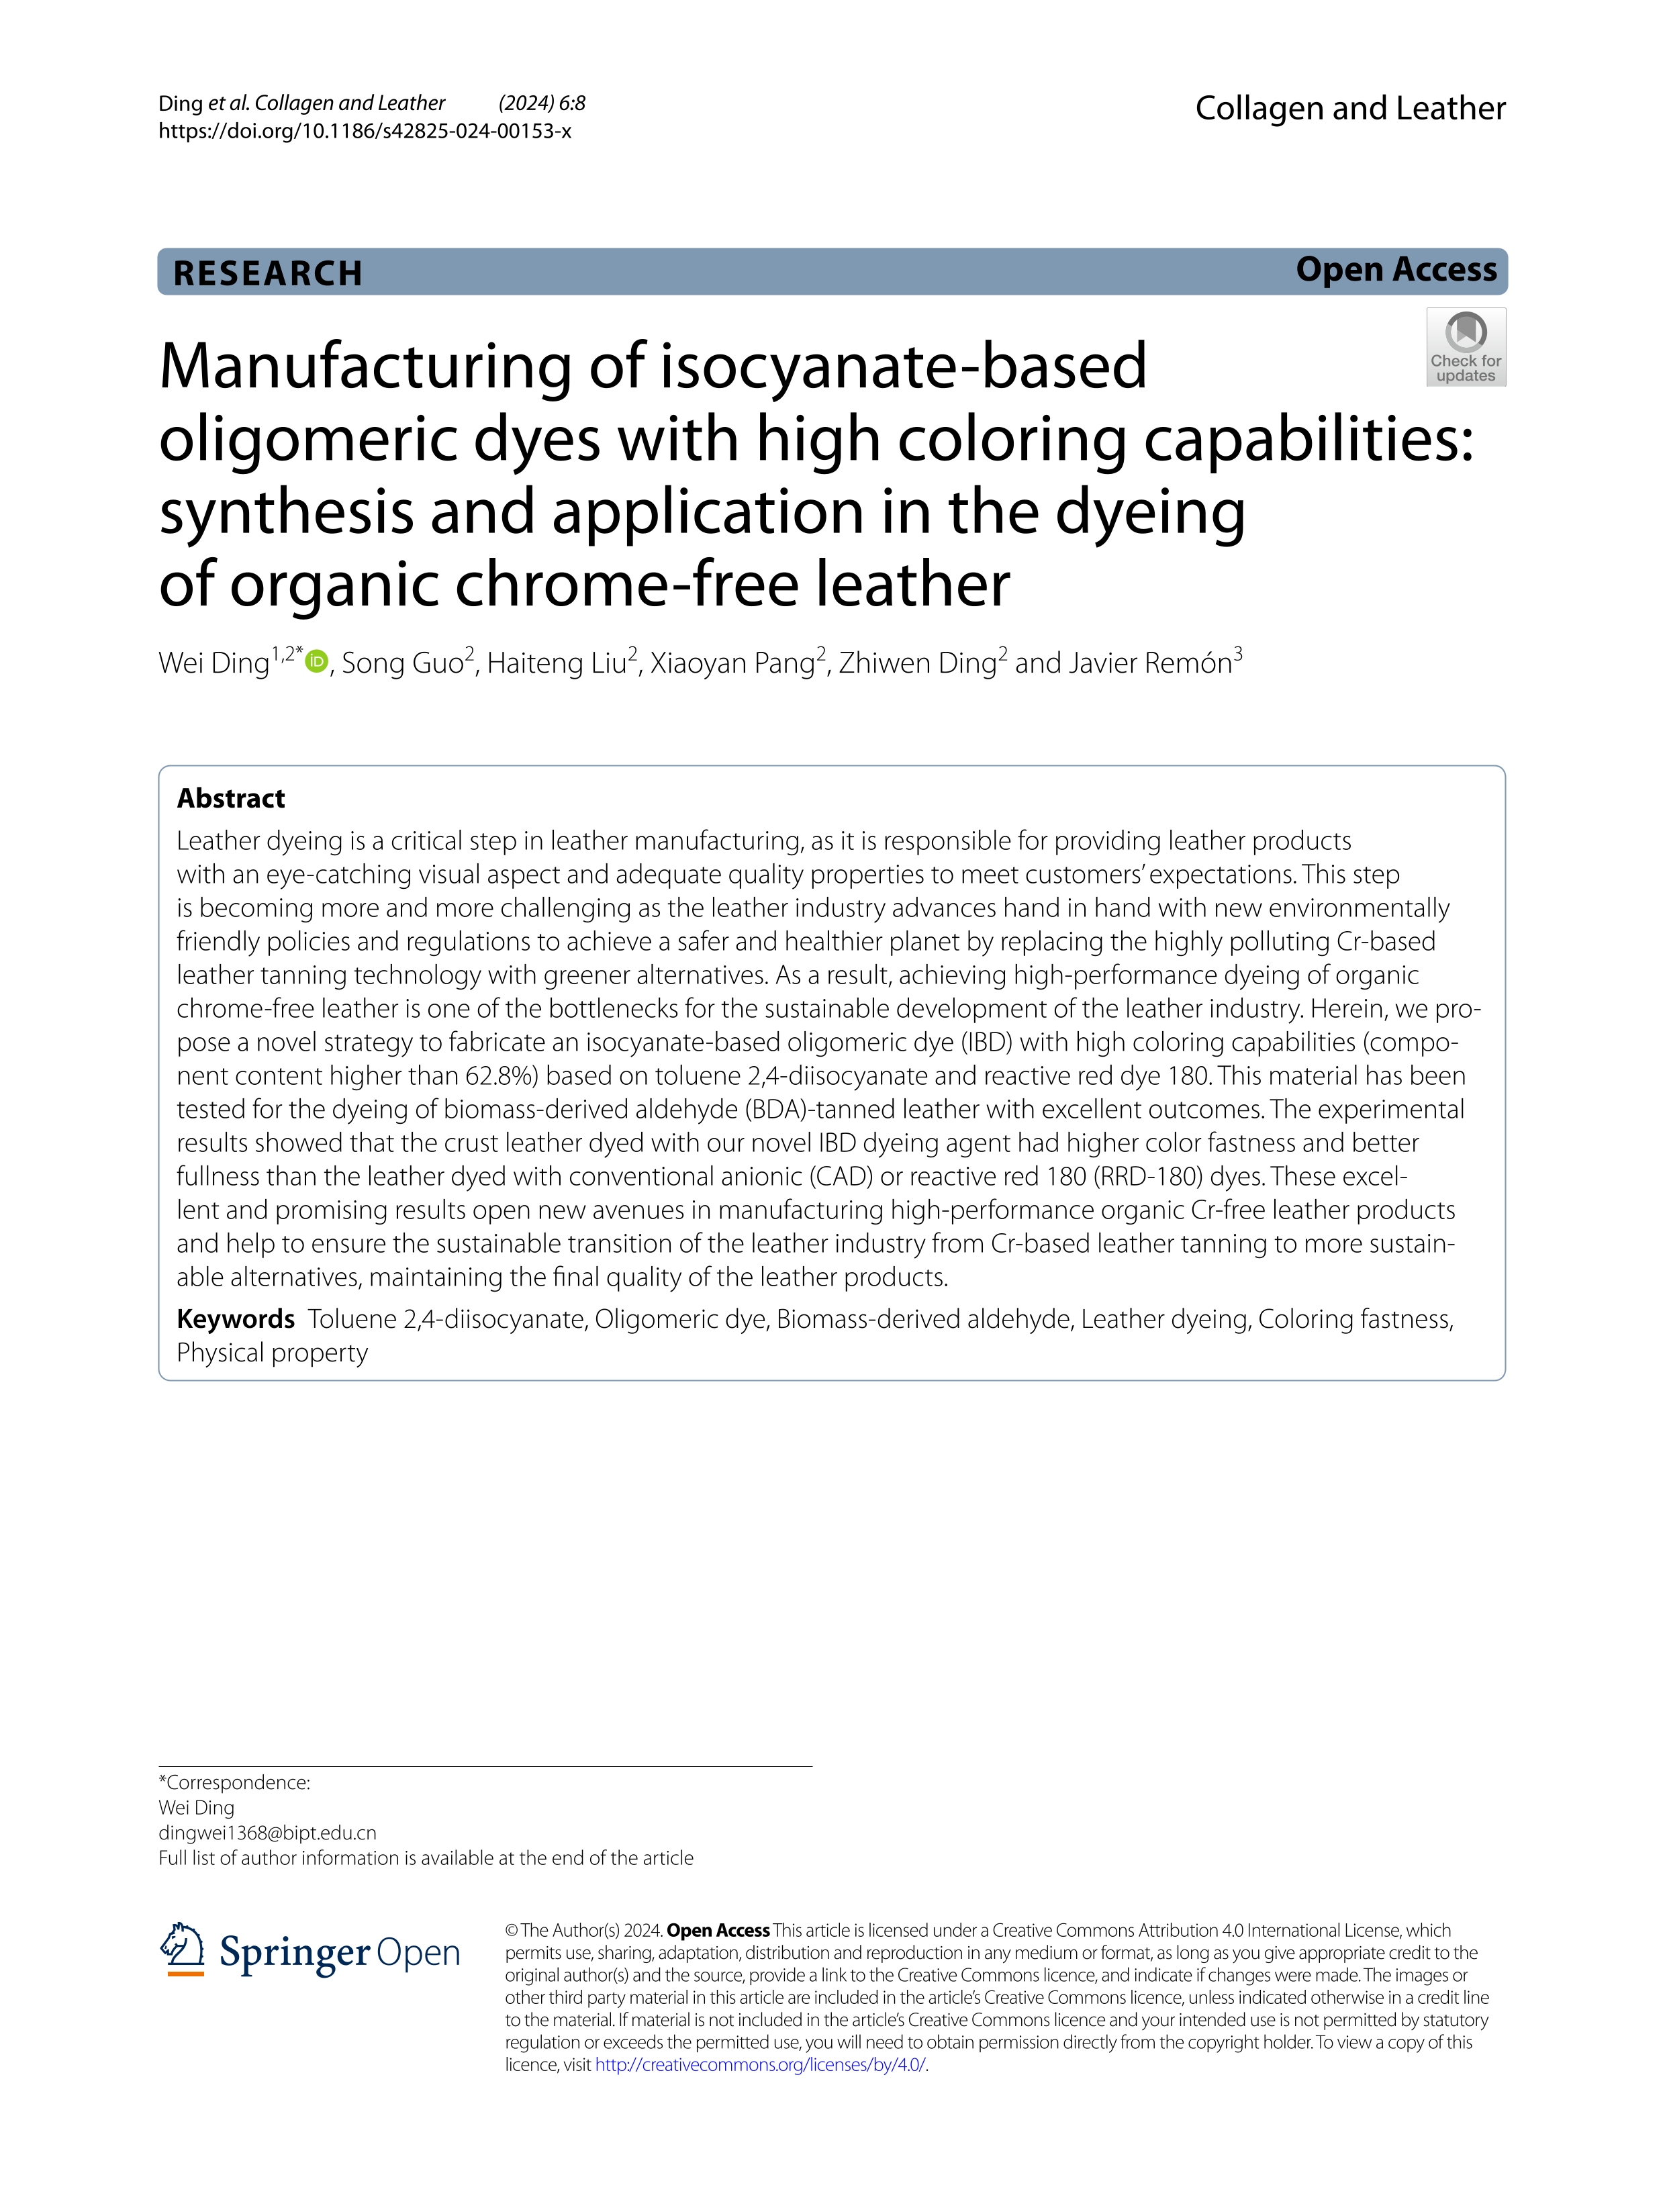 Manufacturing of isocyanate-based oligomeric dyes with high coloring capabilities: synthesis and application in the dyeing of organic chrome-free leather